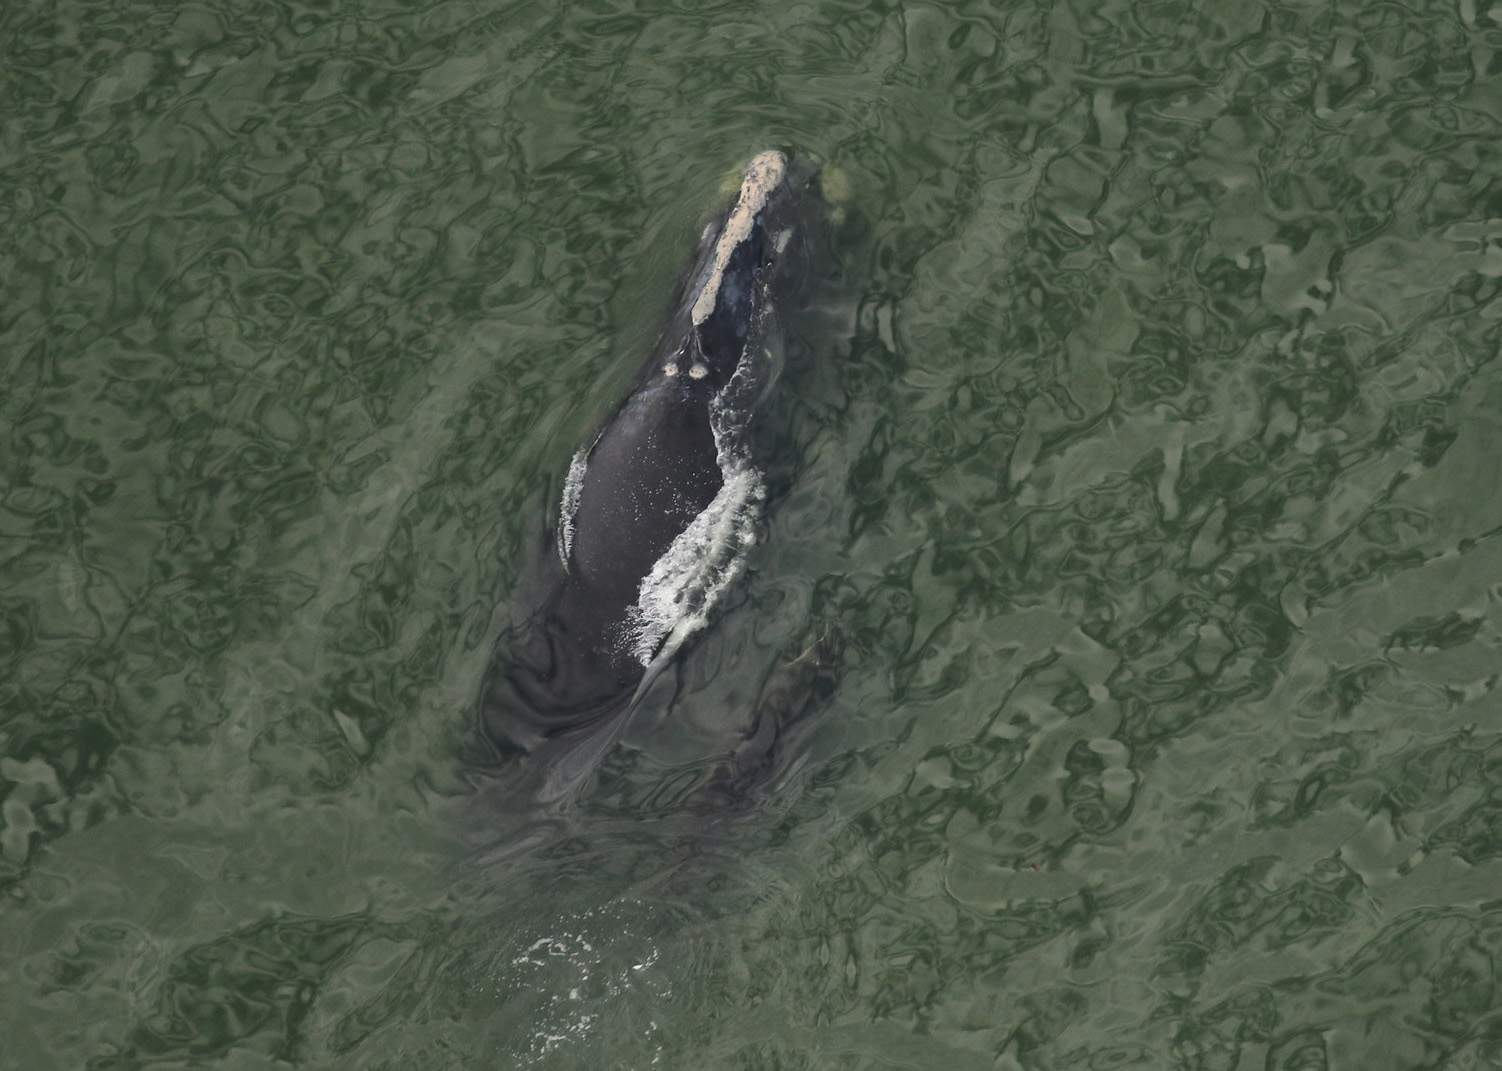 ’Give Them Space’: Critically endangered right whale calves spotted off Florida, Georgia coast